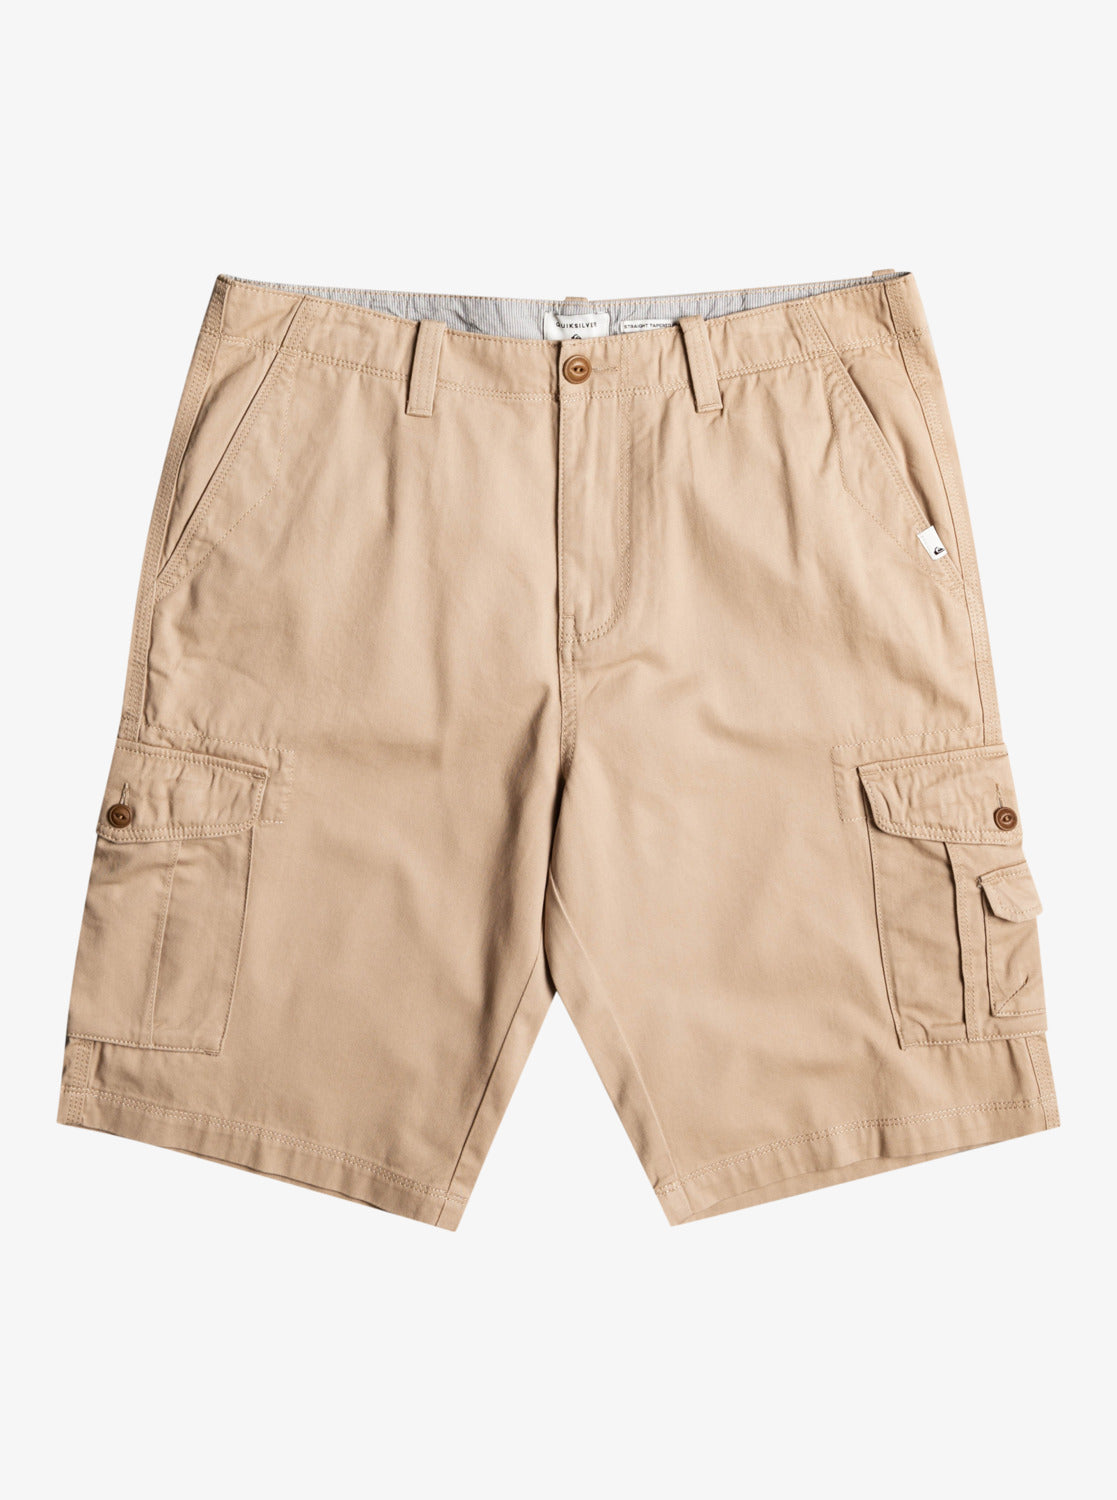 Quiksilver Crucial Battle Cargo Shorts in plage colourway from front